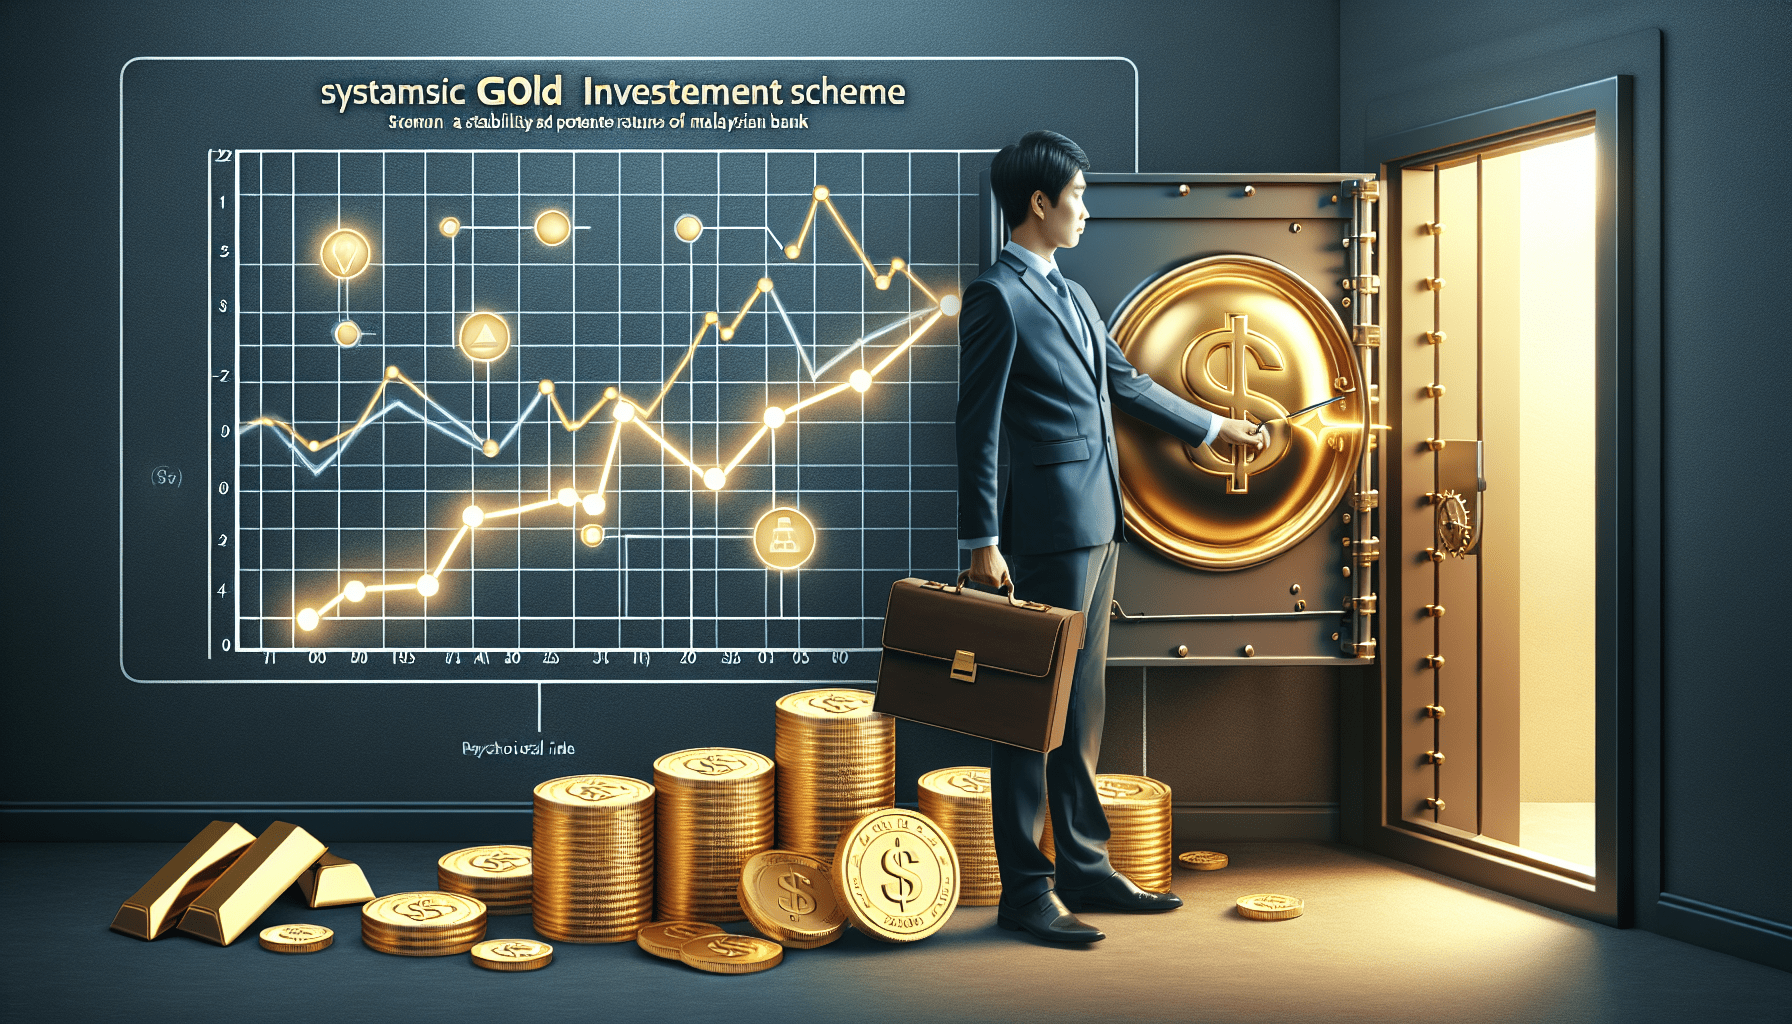 Can I Invest In Gold Systematically With Malaysian Banks?